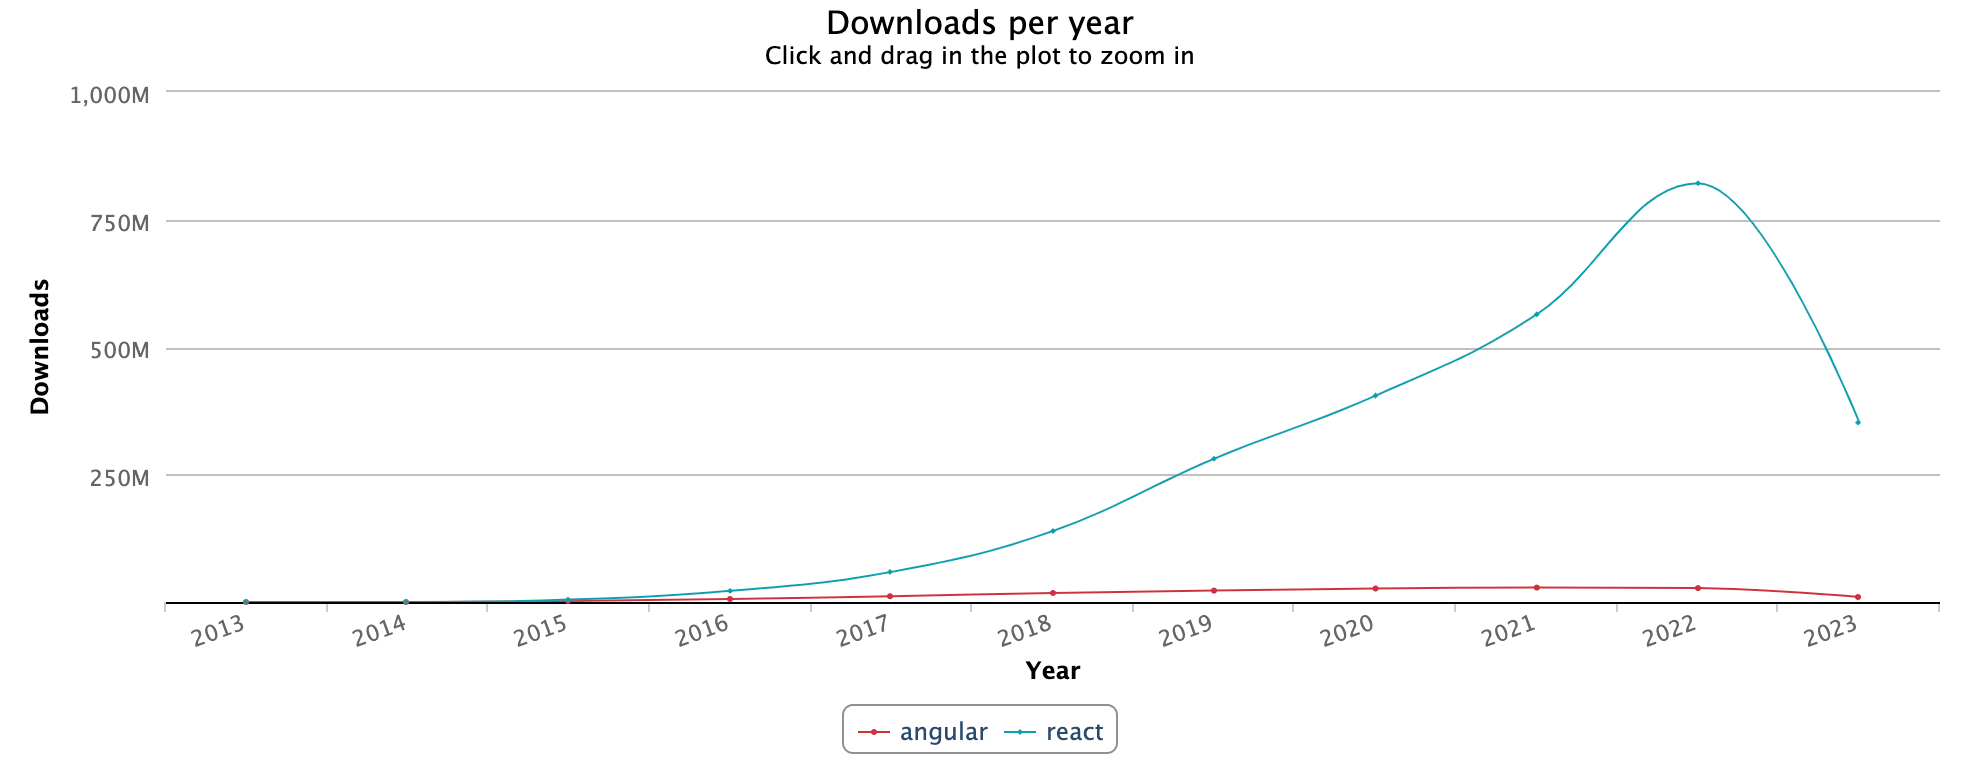 Number of npm downloads of Angular compared to React